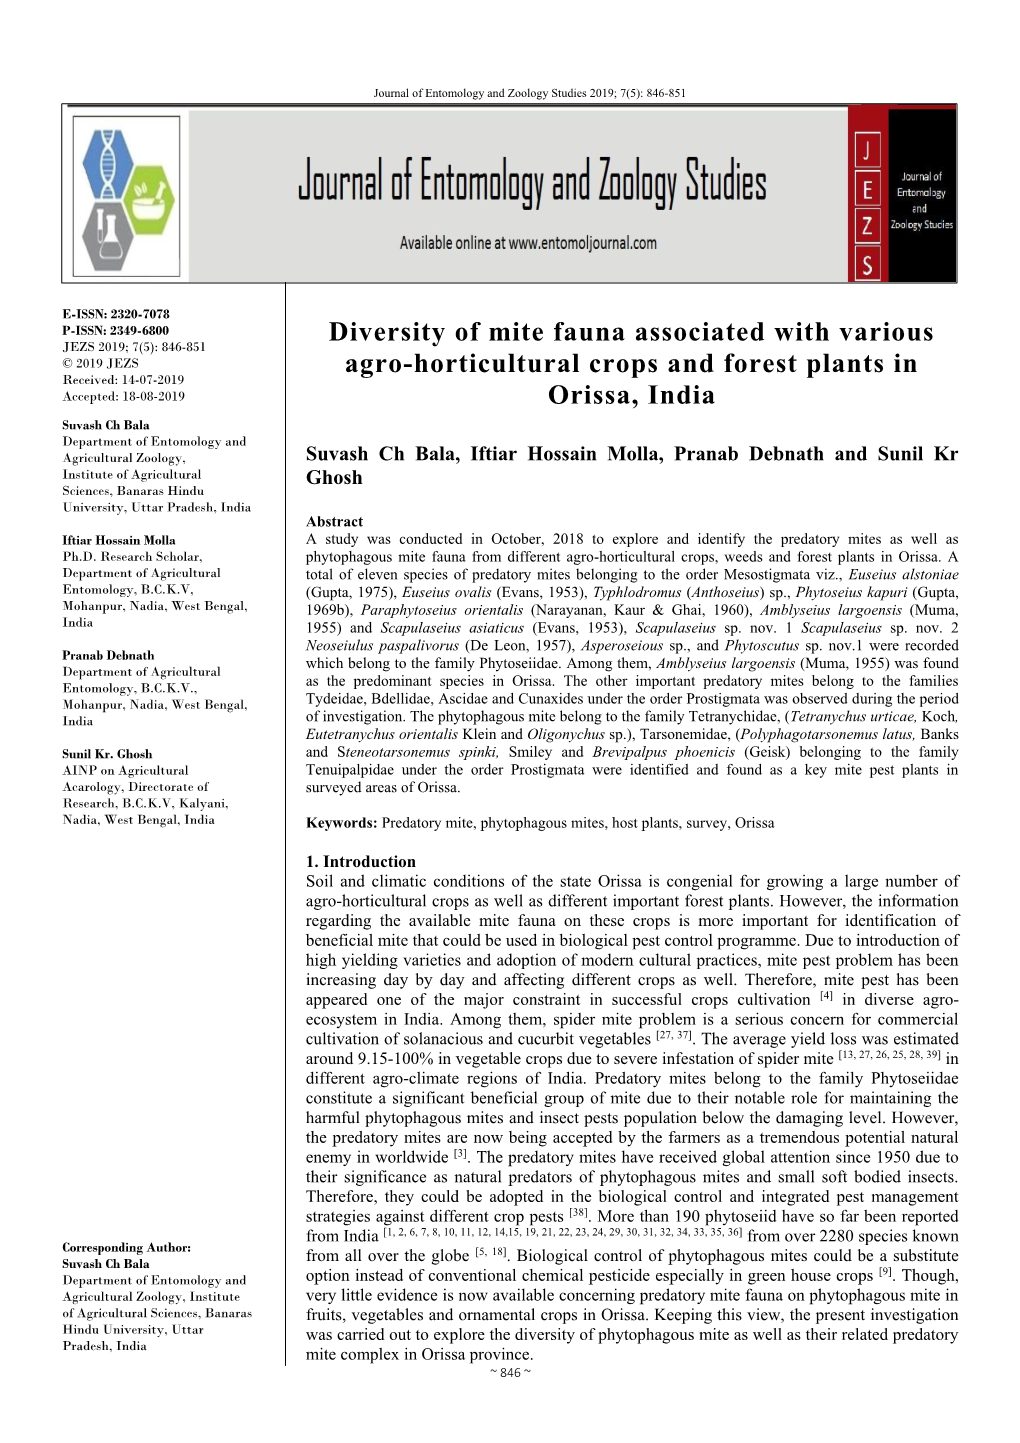 Diversity of Mite Fauna Associated with Various Agro-Horticultural Crops